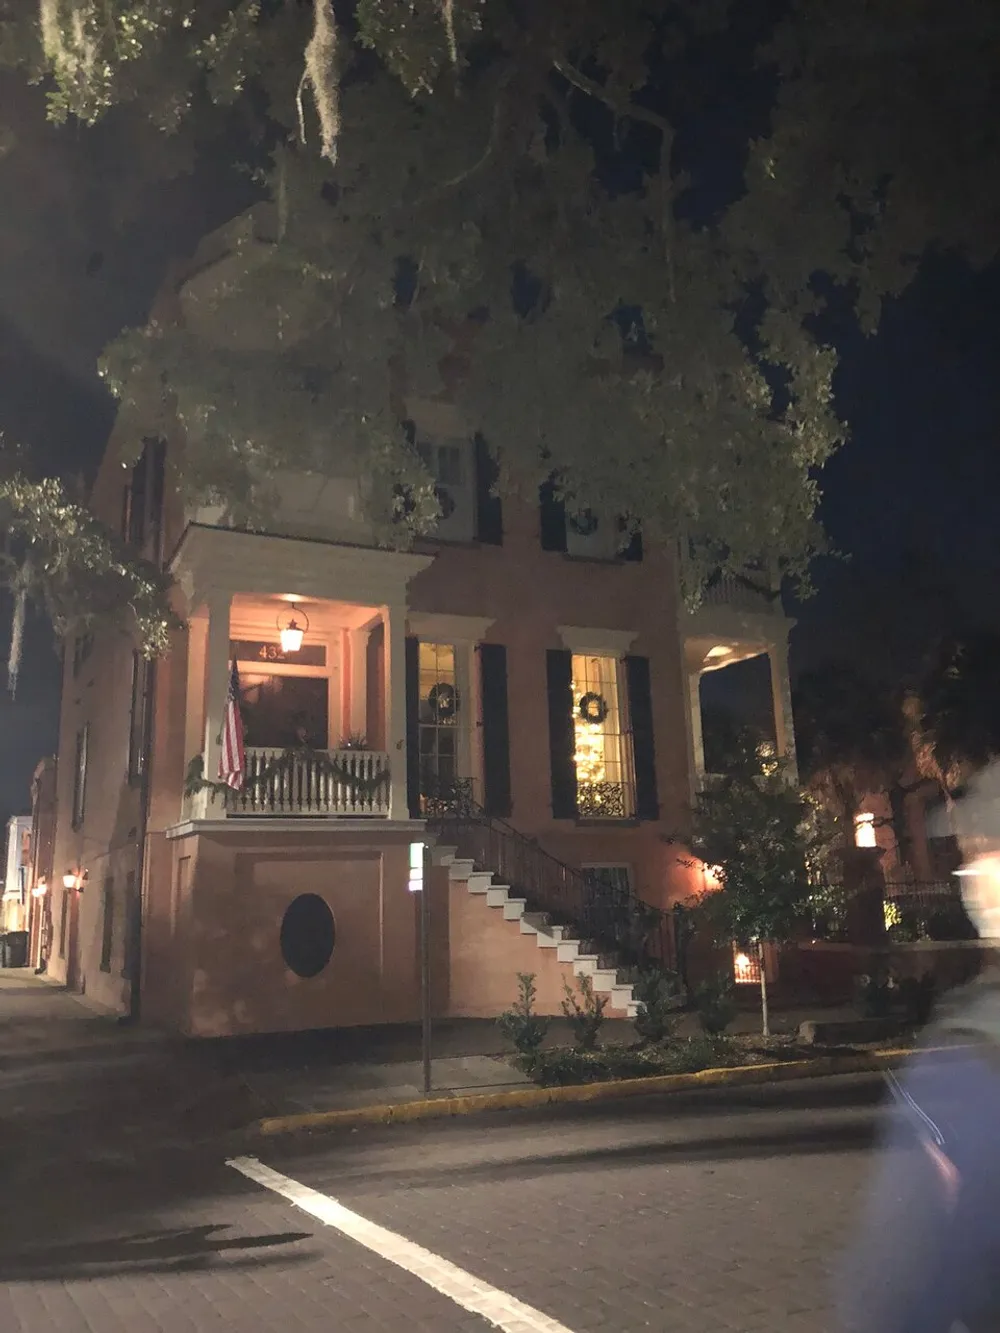 The image shows a stately brick building at night illuminated by exterior lights with a grand staircase leading to an entrance flanked by large windows and draped with Spanish moss-laden trees overhead